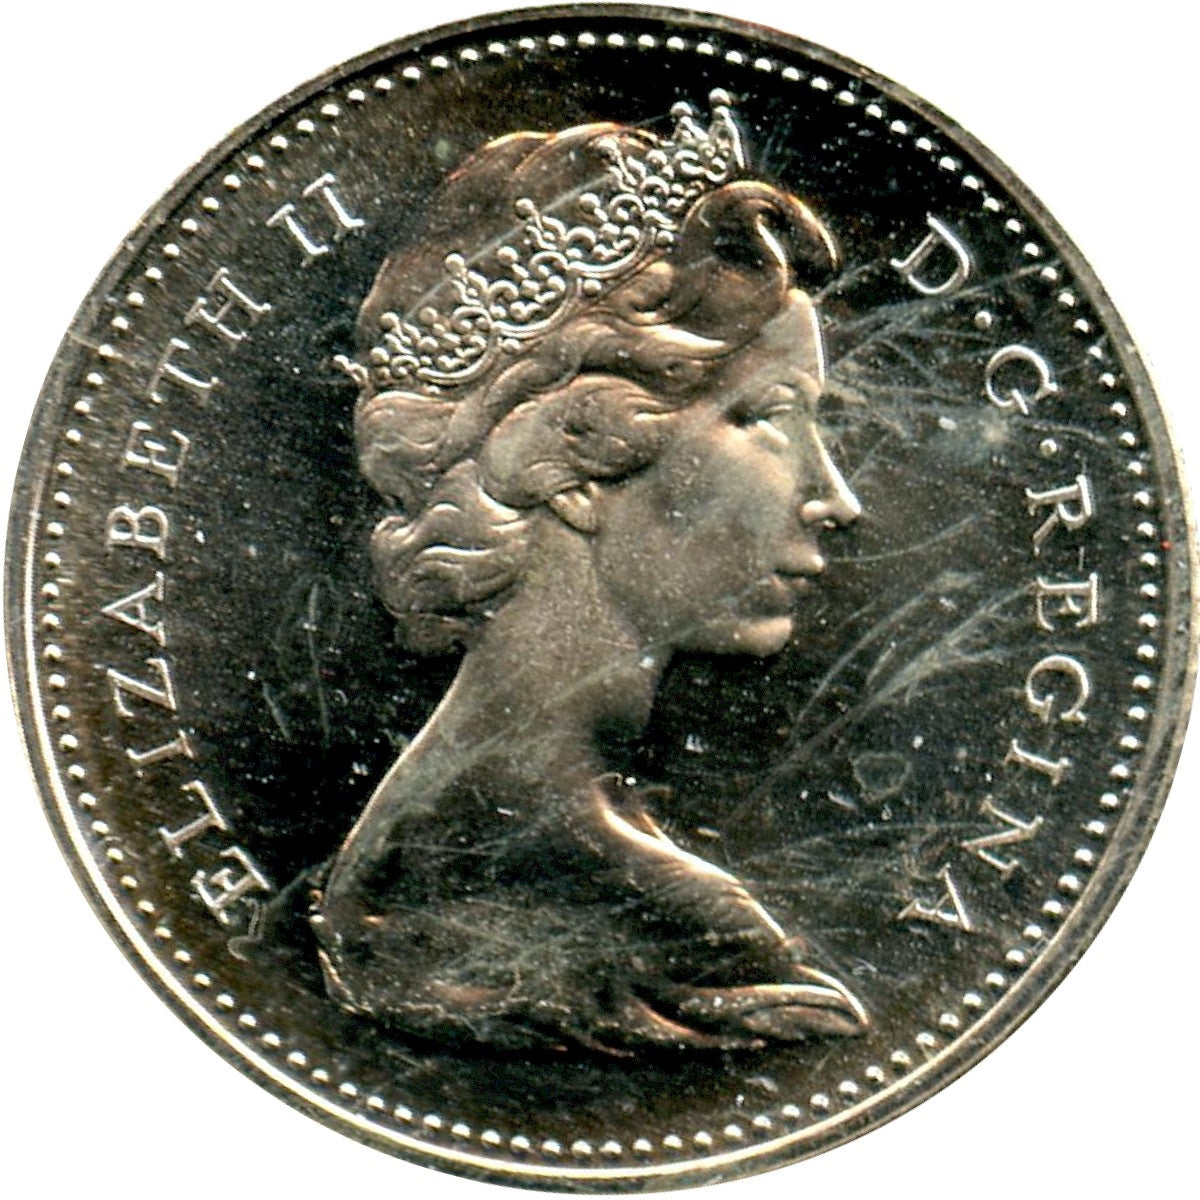 1965 Canada 10-cents Proof Like